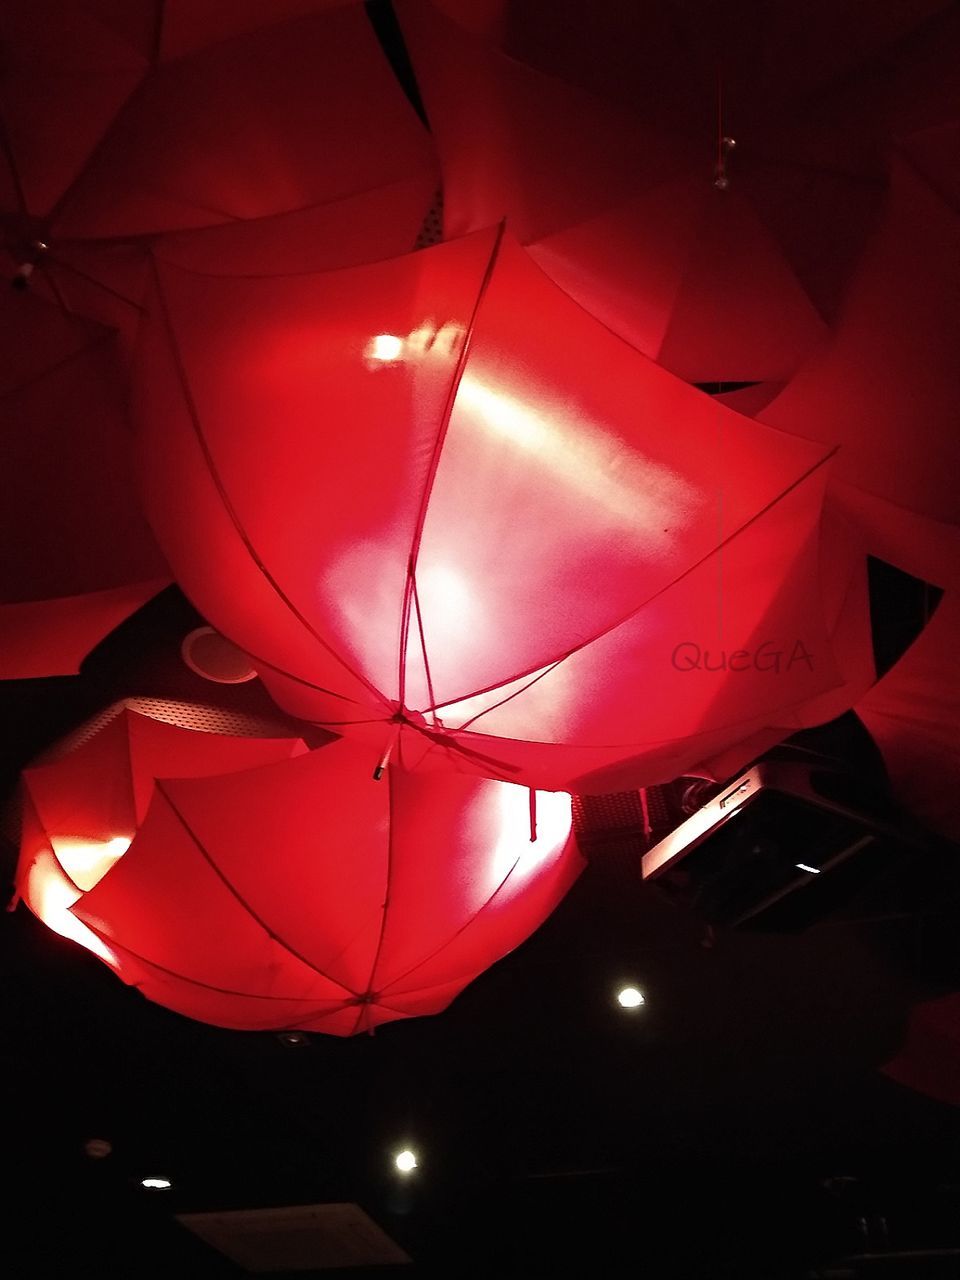 illuminated, red, air vehicle, lighting equipment, low angle view, no people, hanging, night, indoors, lantern, balloon, light, nature, transportation, close-up, ceiling, decoration, airplane, paper lantern